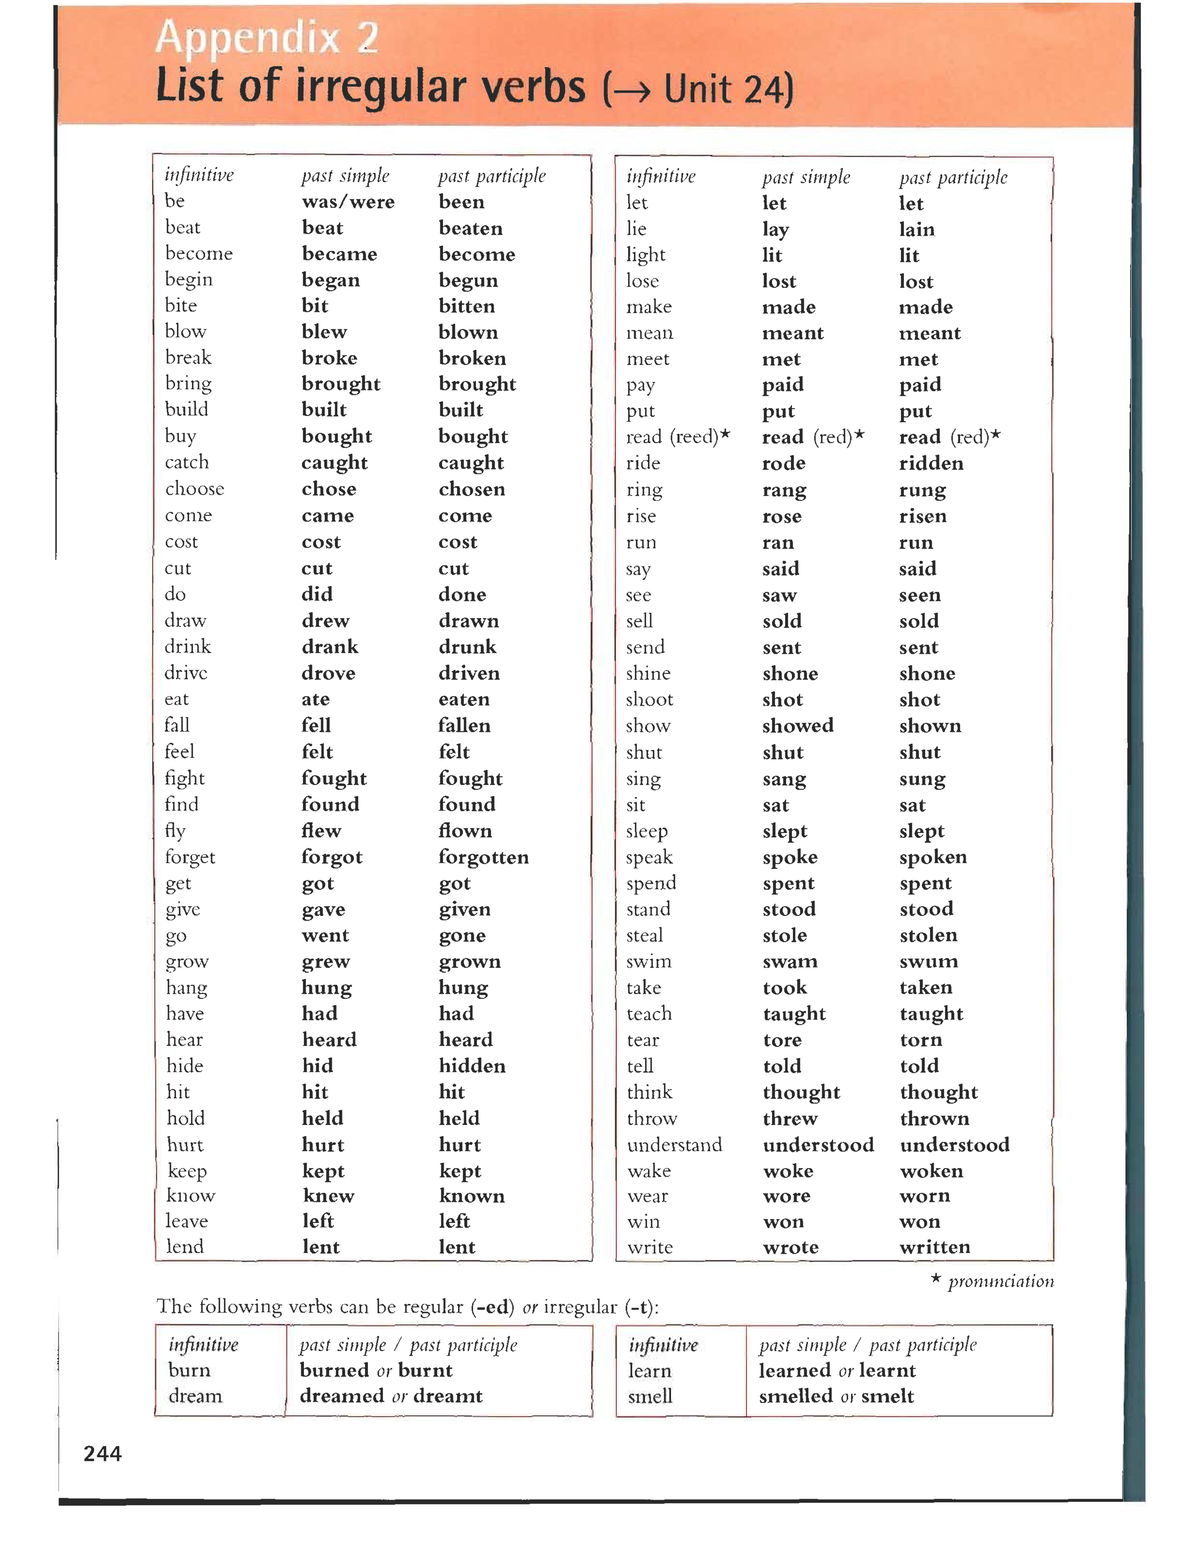 List of irregular verb - notes and examples - tiếng anh 1 - Studocu